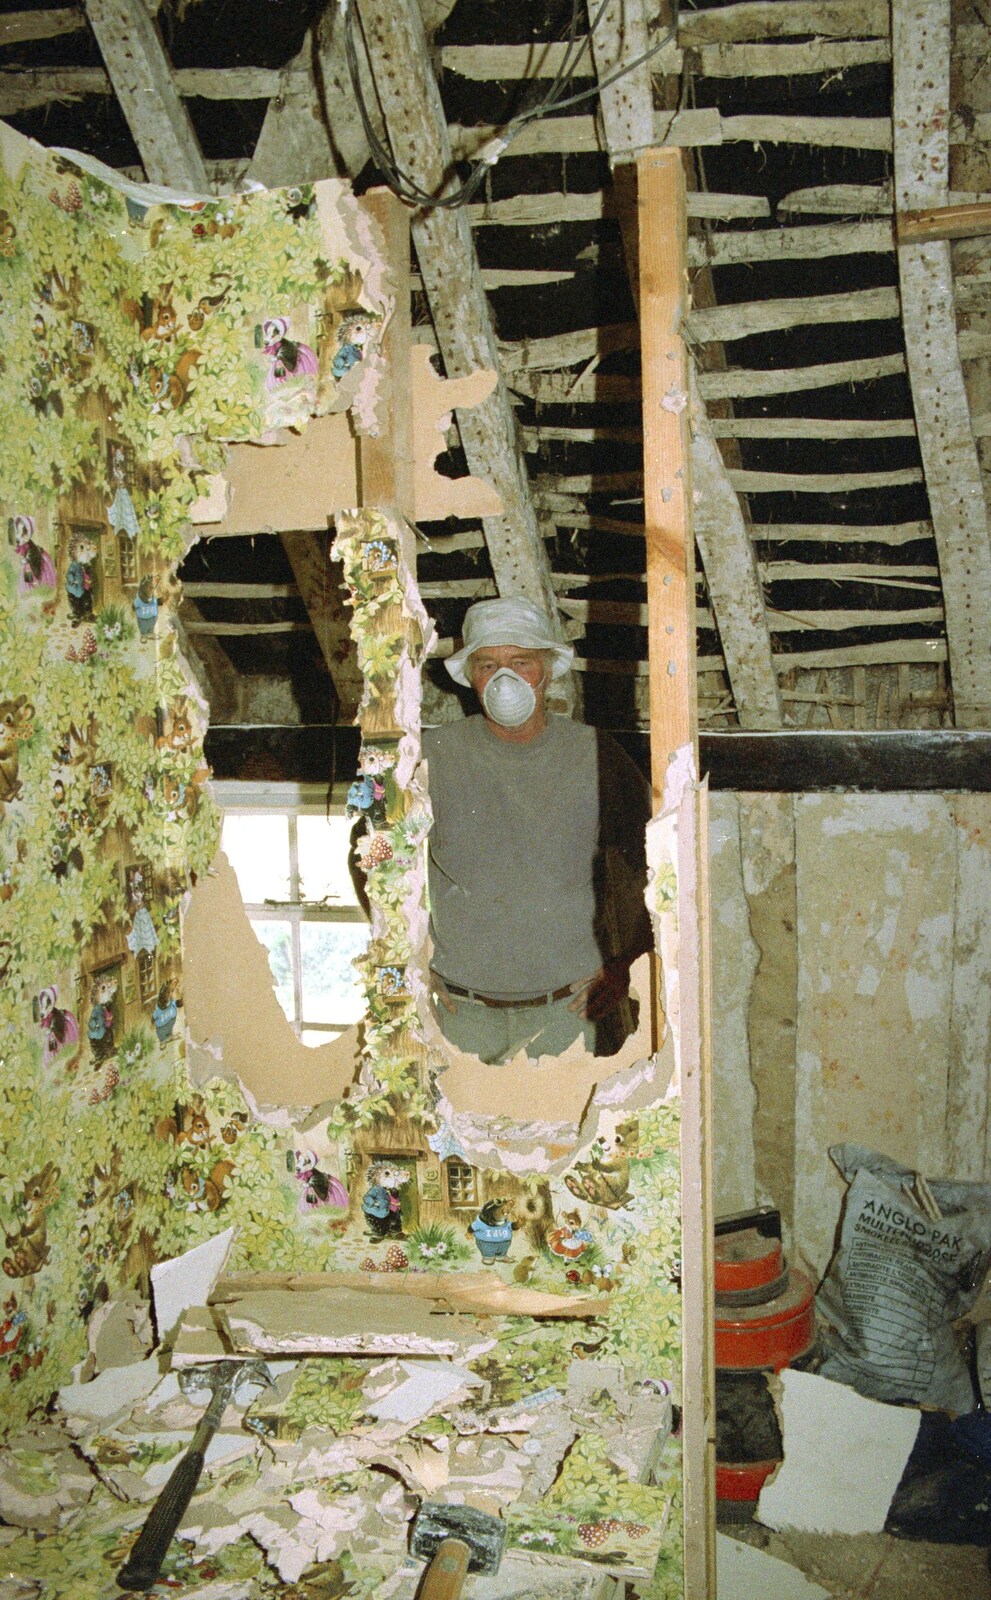 The Old Chap peers through a destroyed wall from Hale-Bopp and Bedroom Demolition, Brome, Suffolk - 10th May 1997